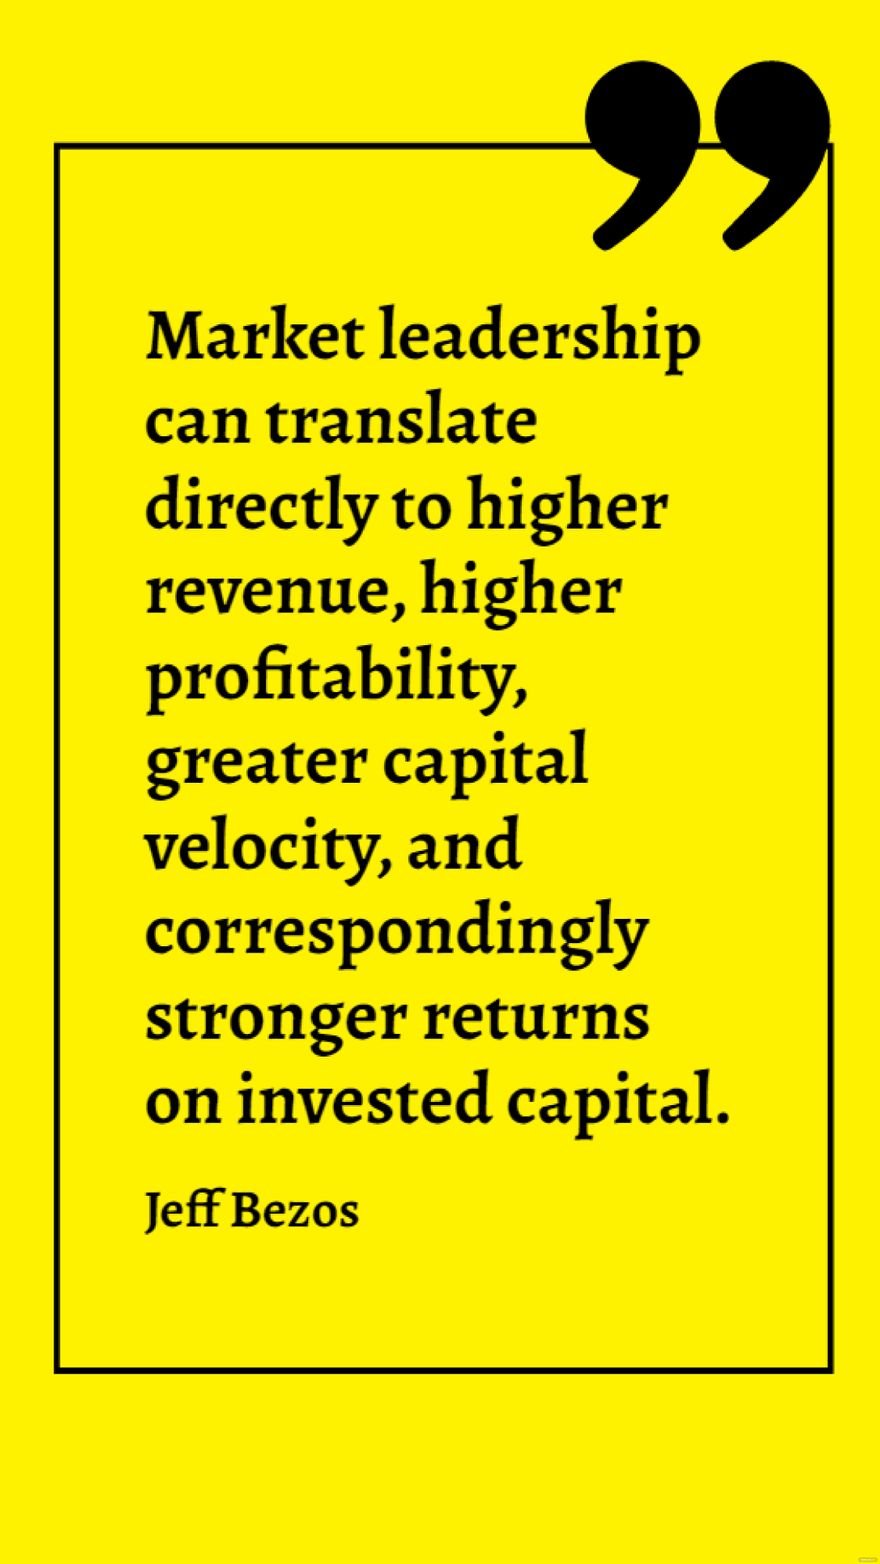 Free Jeff Bezos - Market leadership can translate directly to higher revenue, higher profitability, greater capital velocity, and correspondingly stronger returns on invested capital.